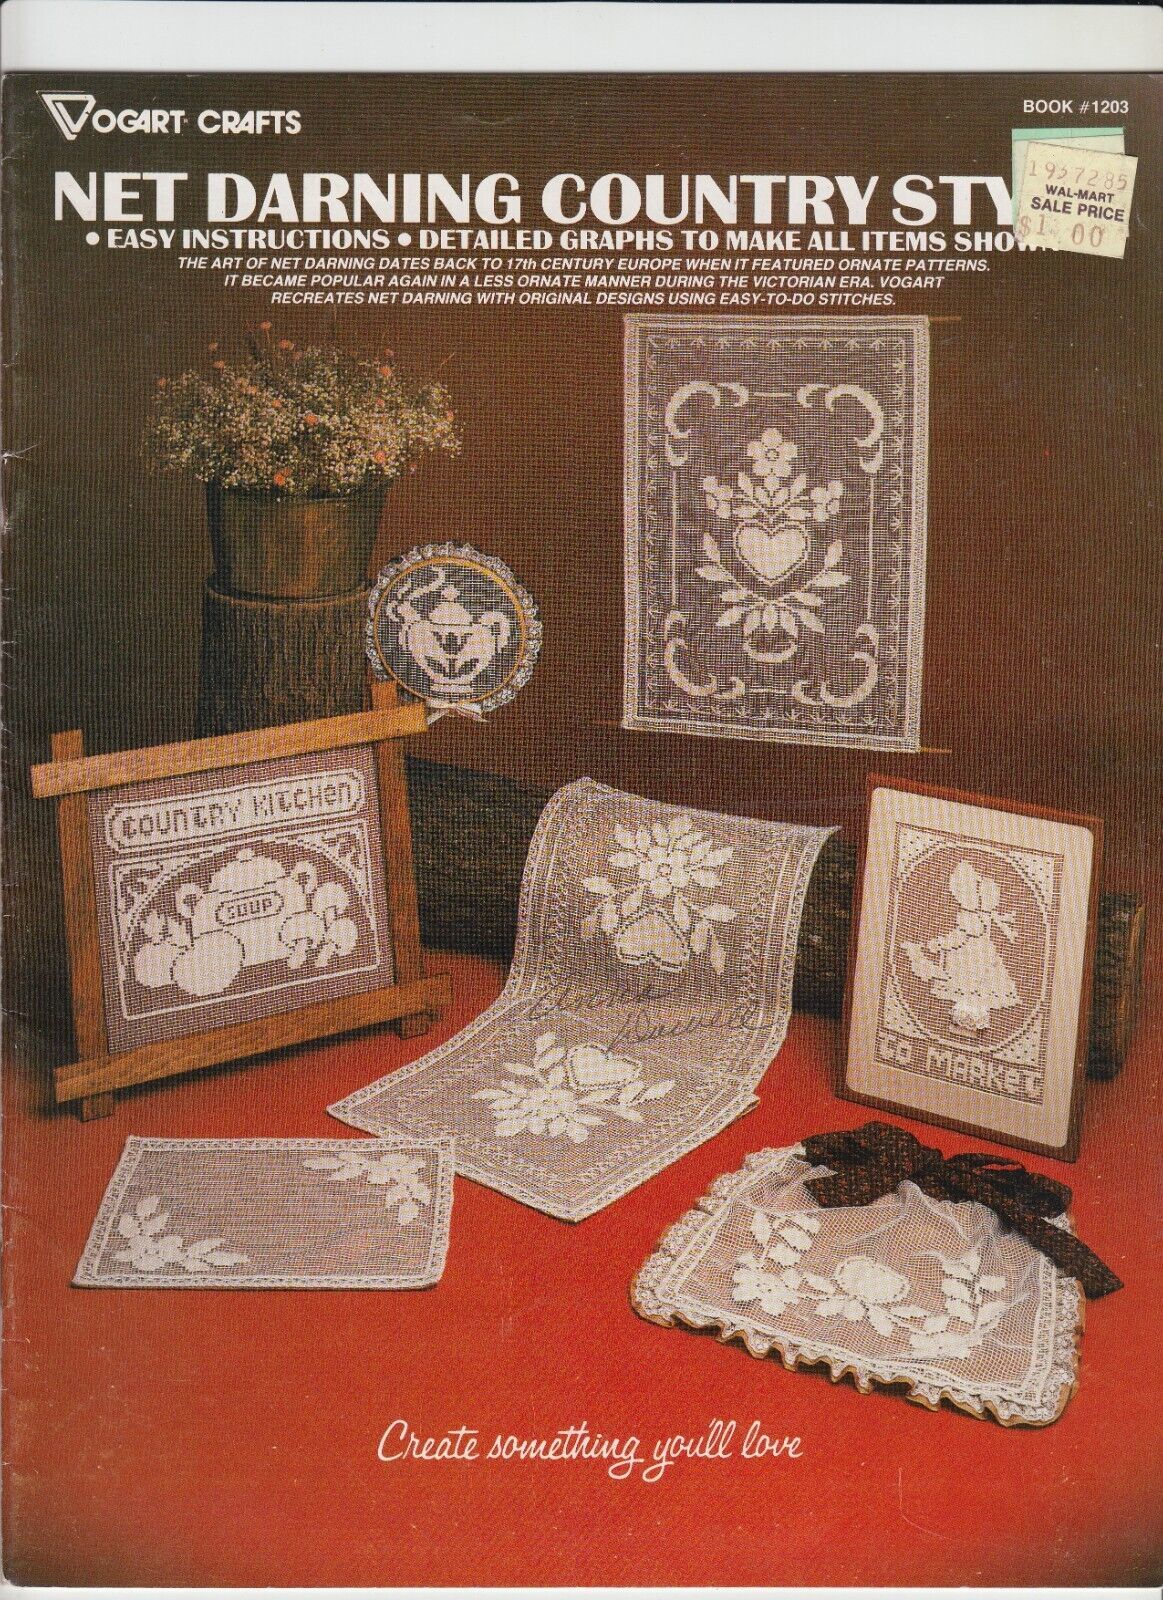 Vogart Crafts Net Darning Country Style Pattern Booklet #1203 Lace - $7.37